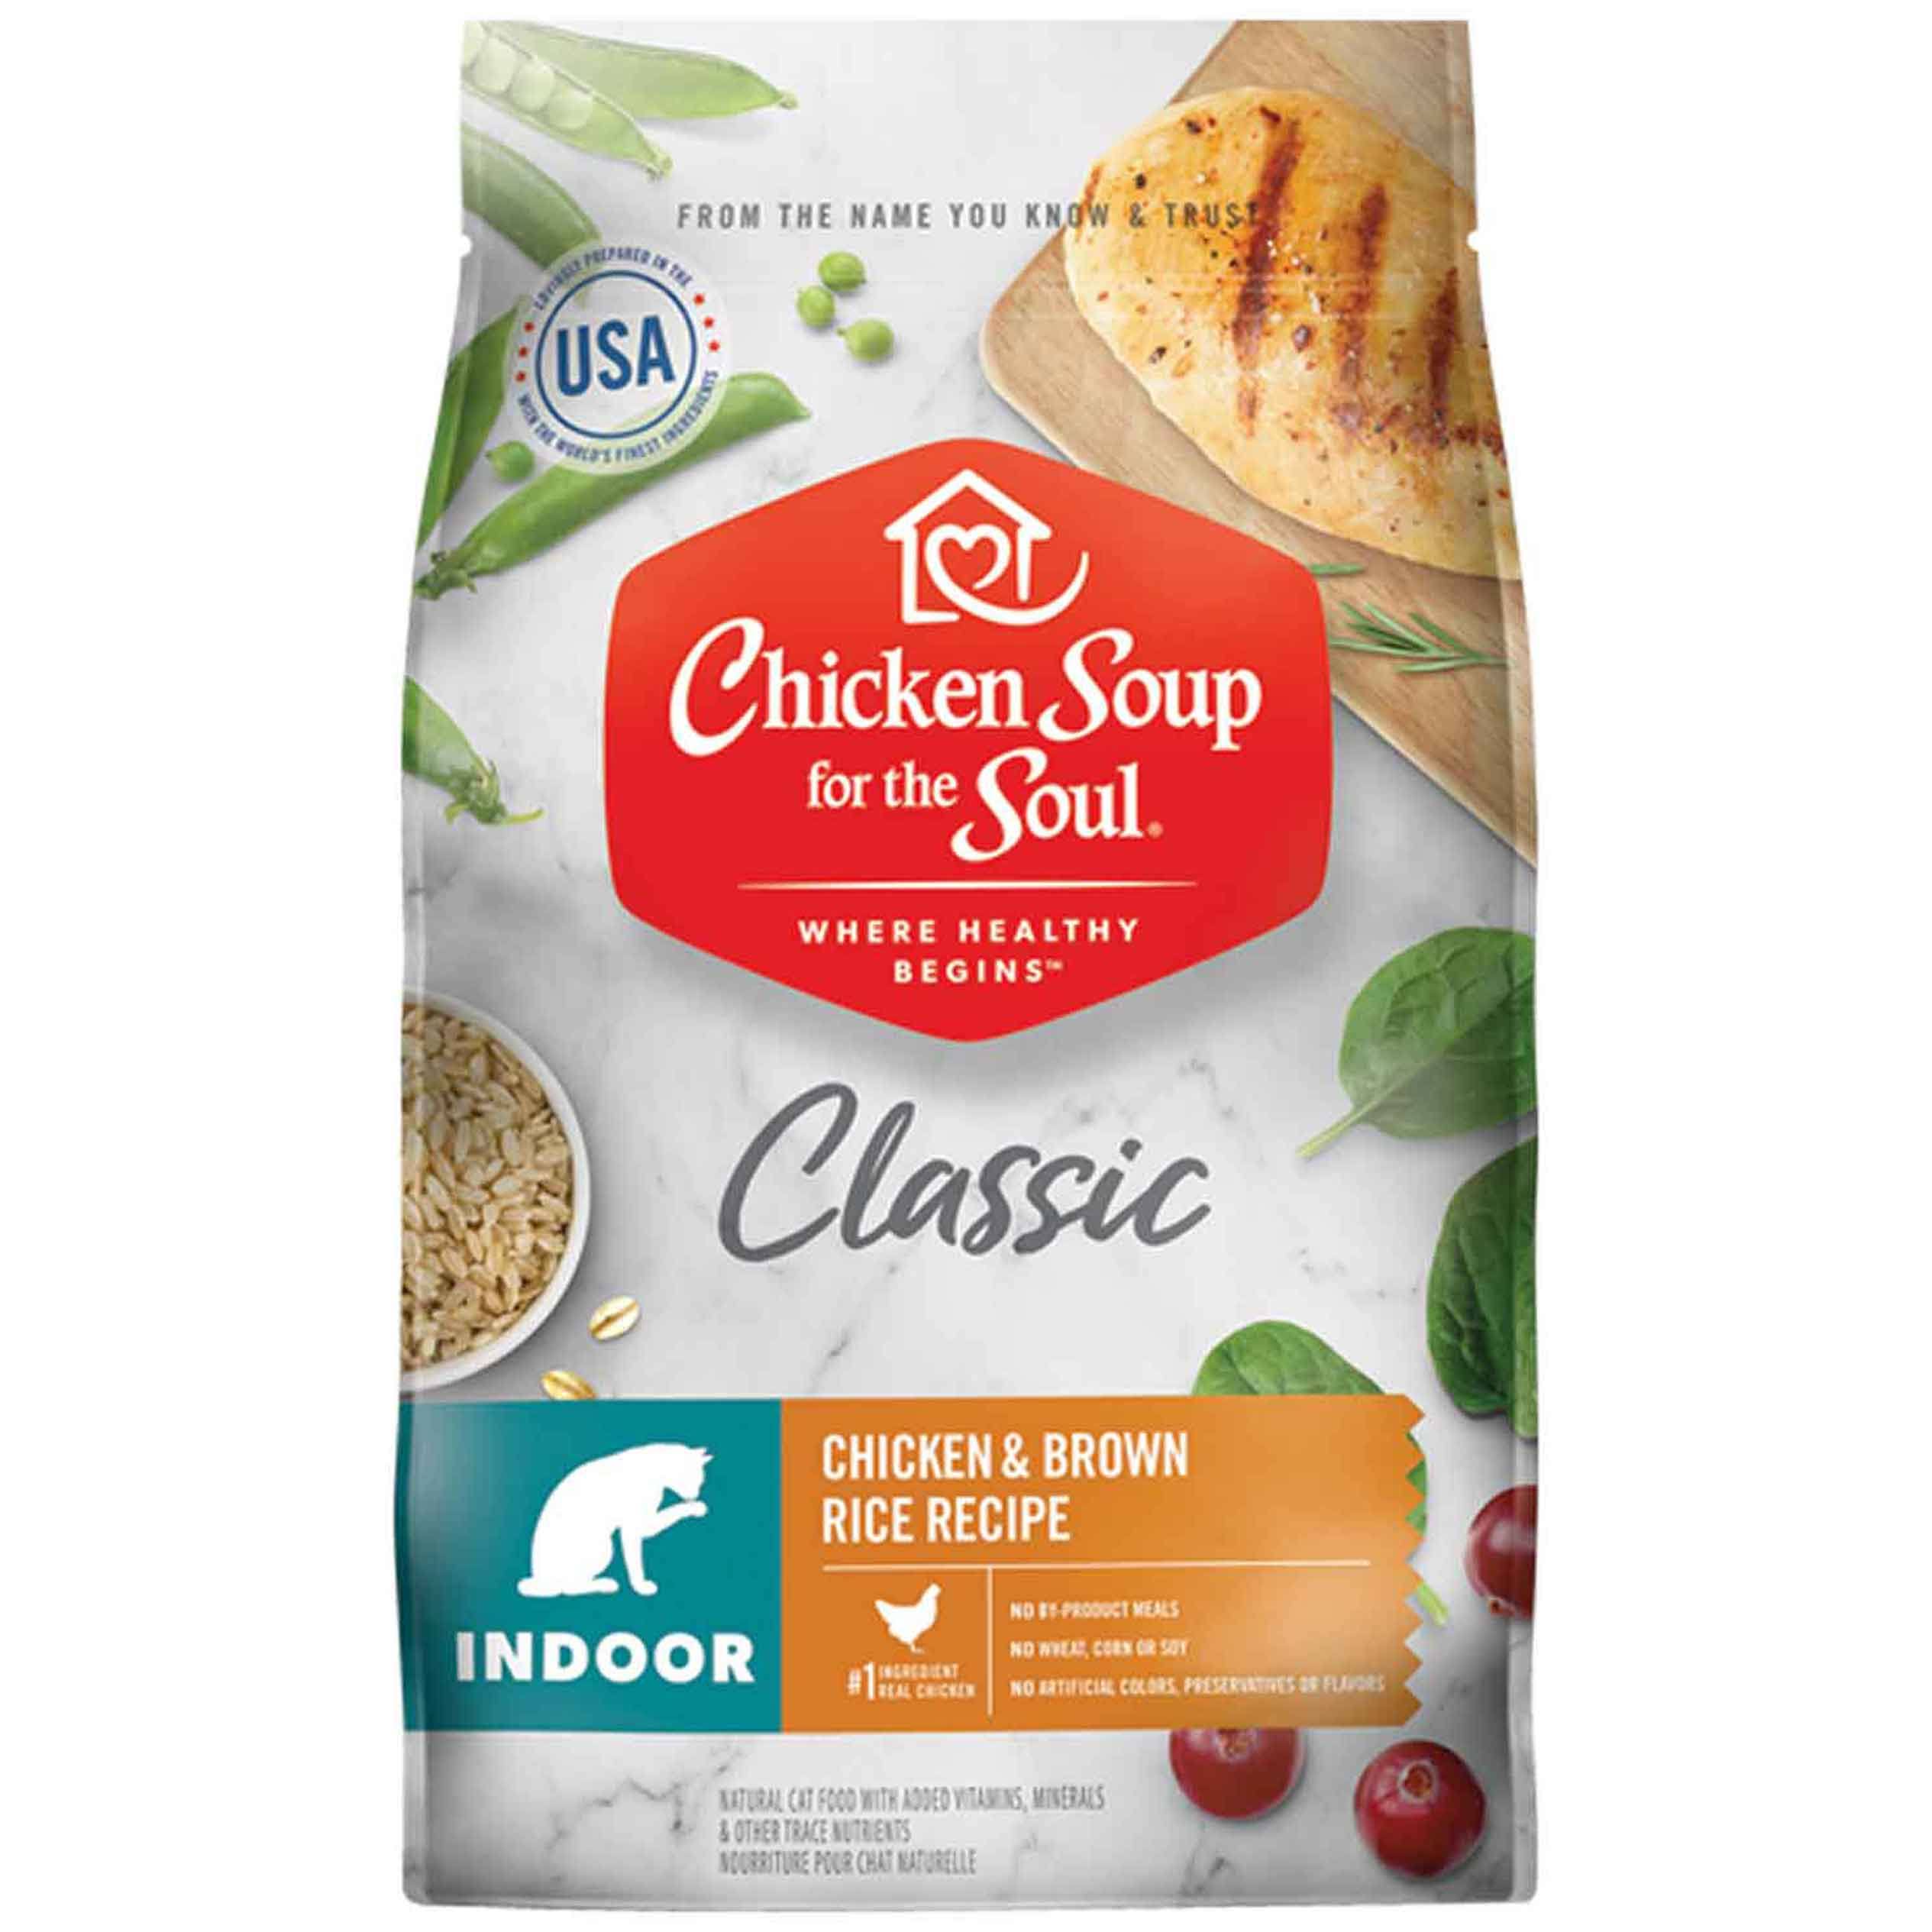 Chicken Soup For The Soul Classic Indoor Dry Cat Food - Chicken & Brown Rice - 4.5 lbs